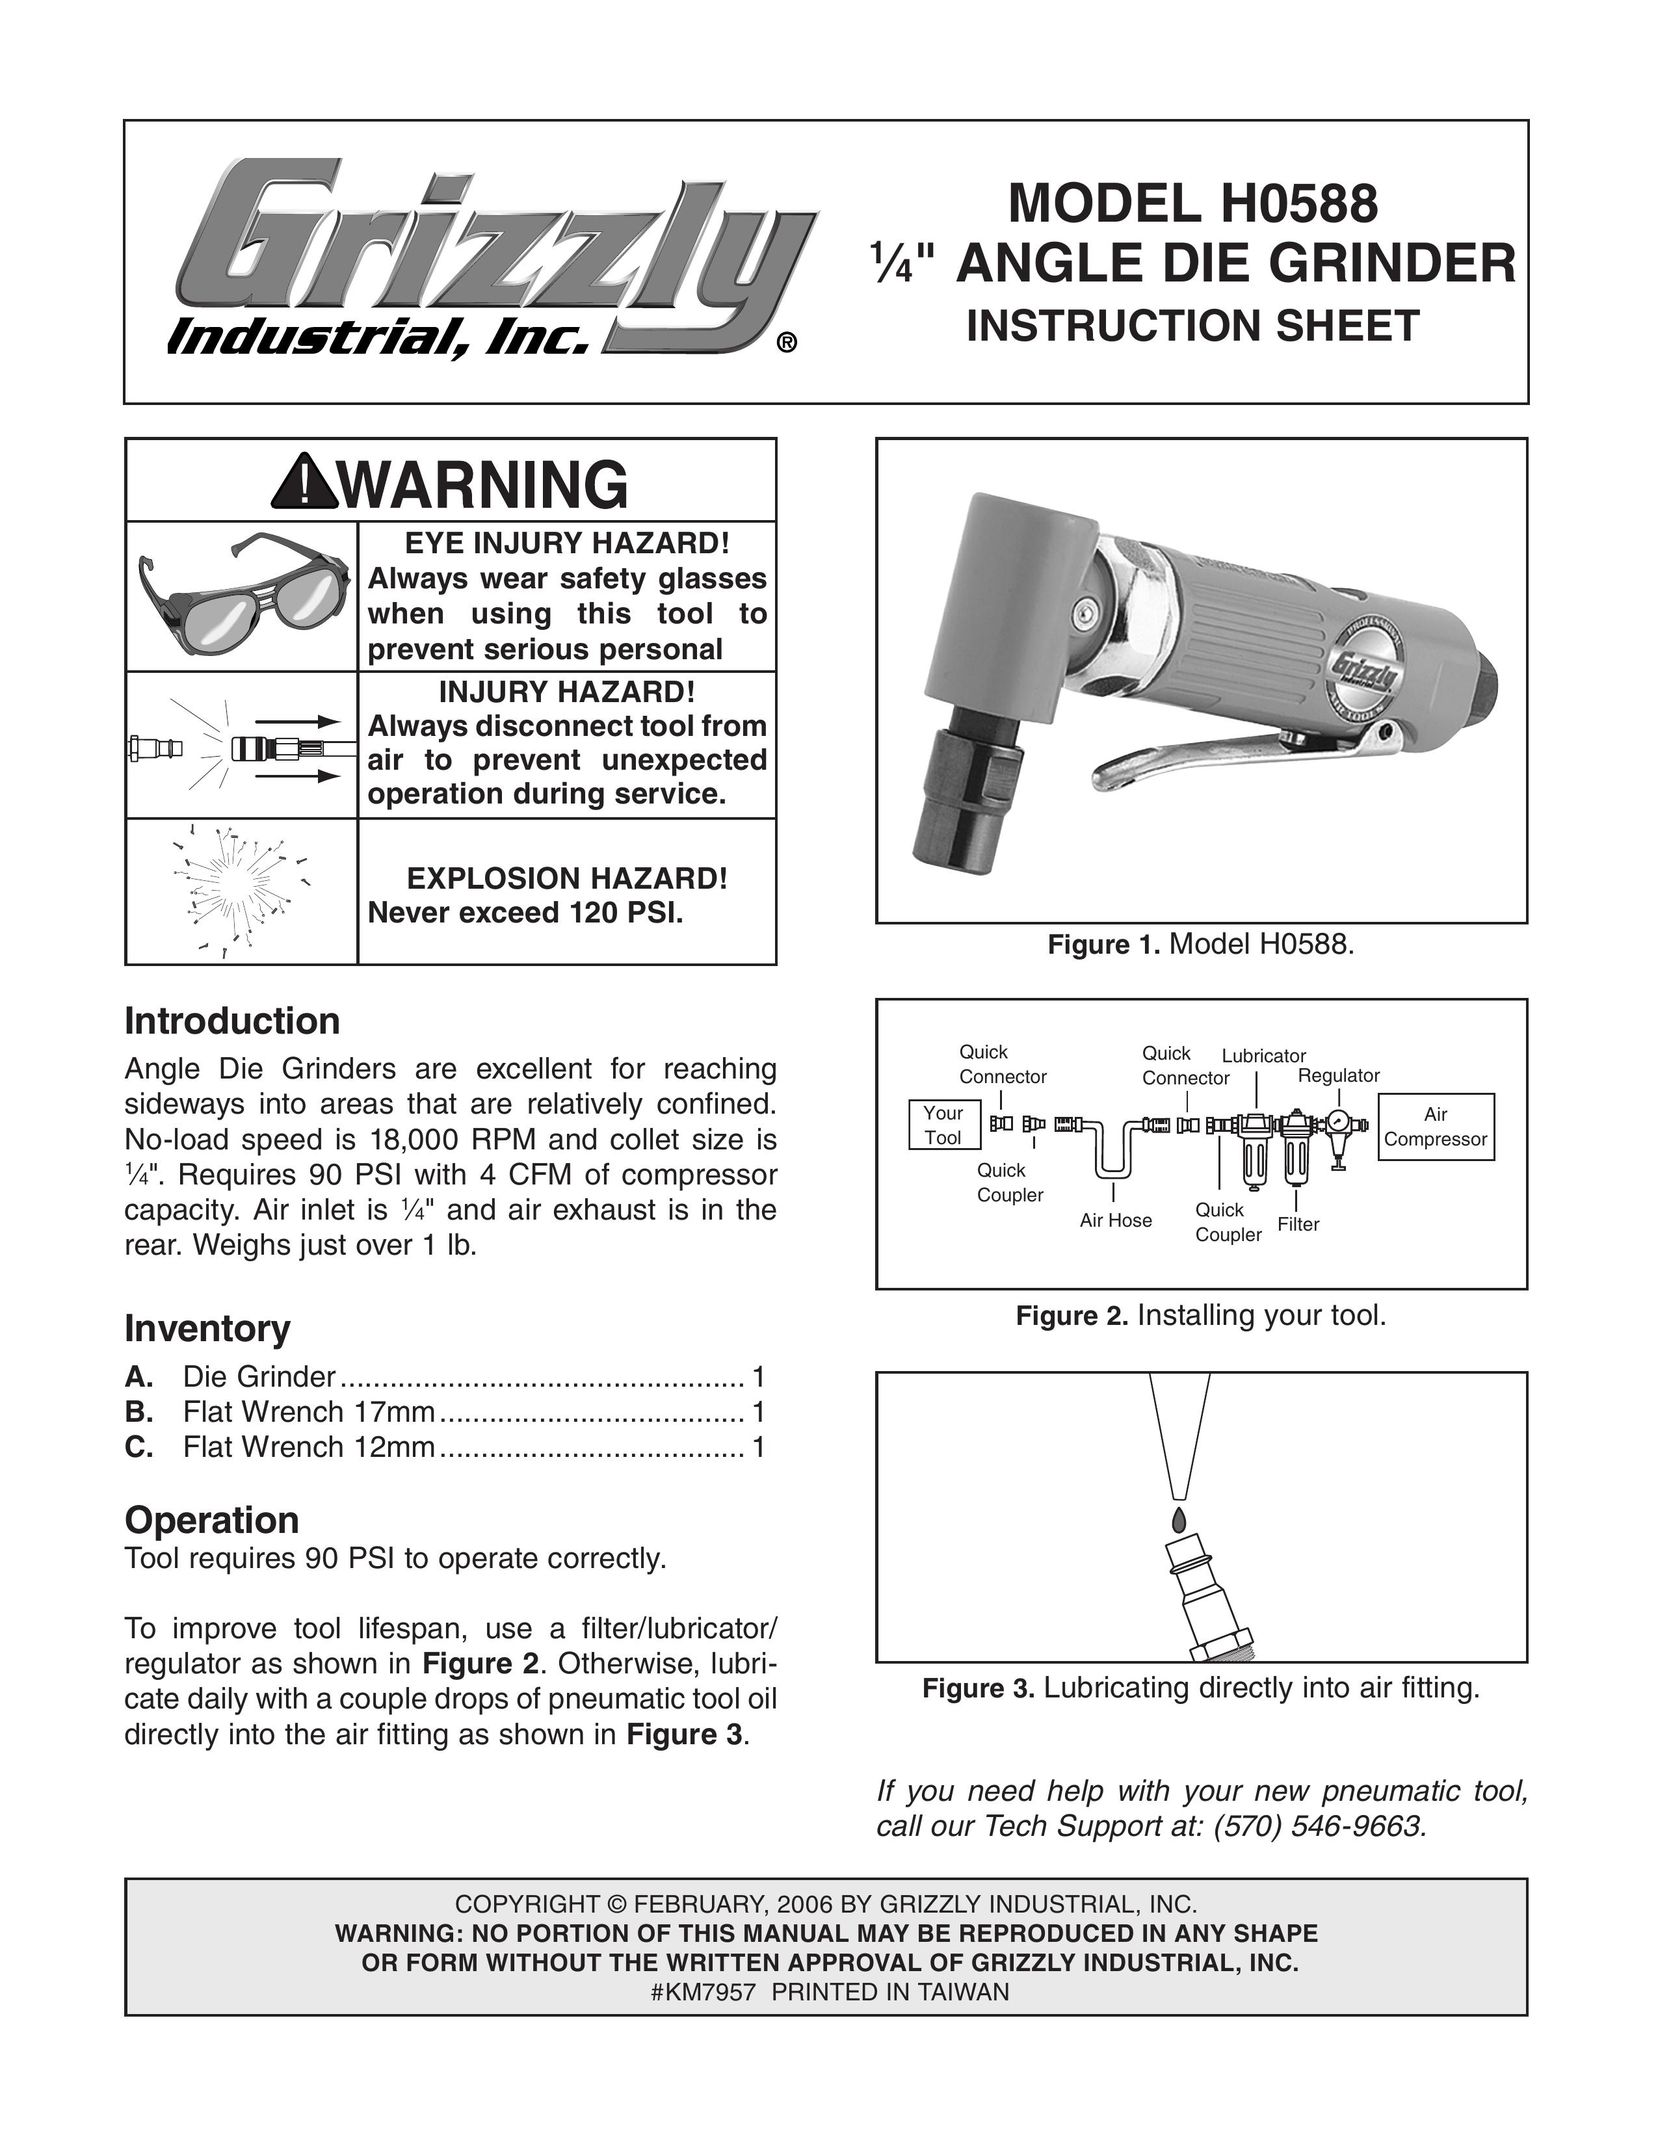 Grizzly H0588 Grinder User Manual